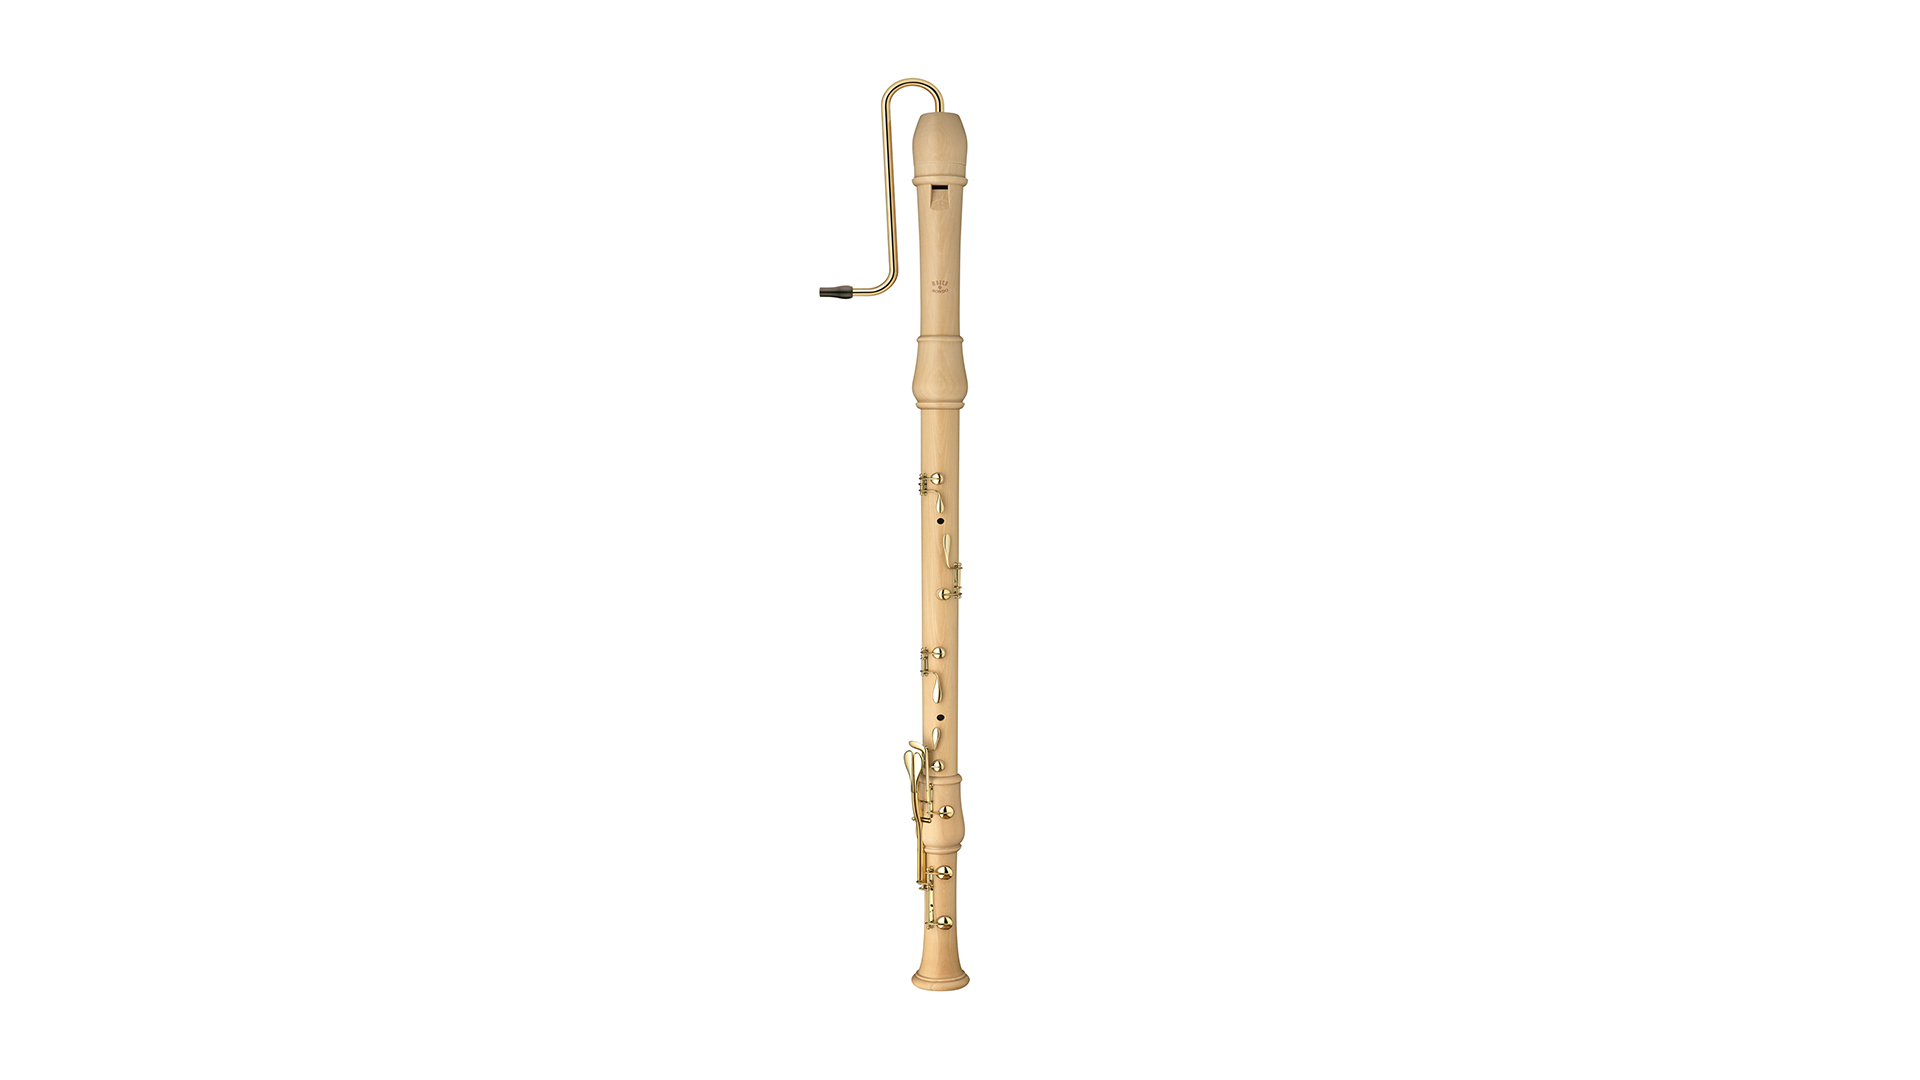 Moeck, "Flauto Rondo", great bass in c, baroque double hole, maple